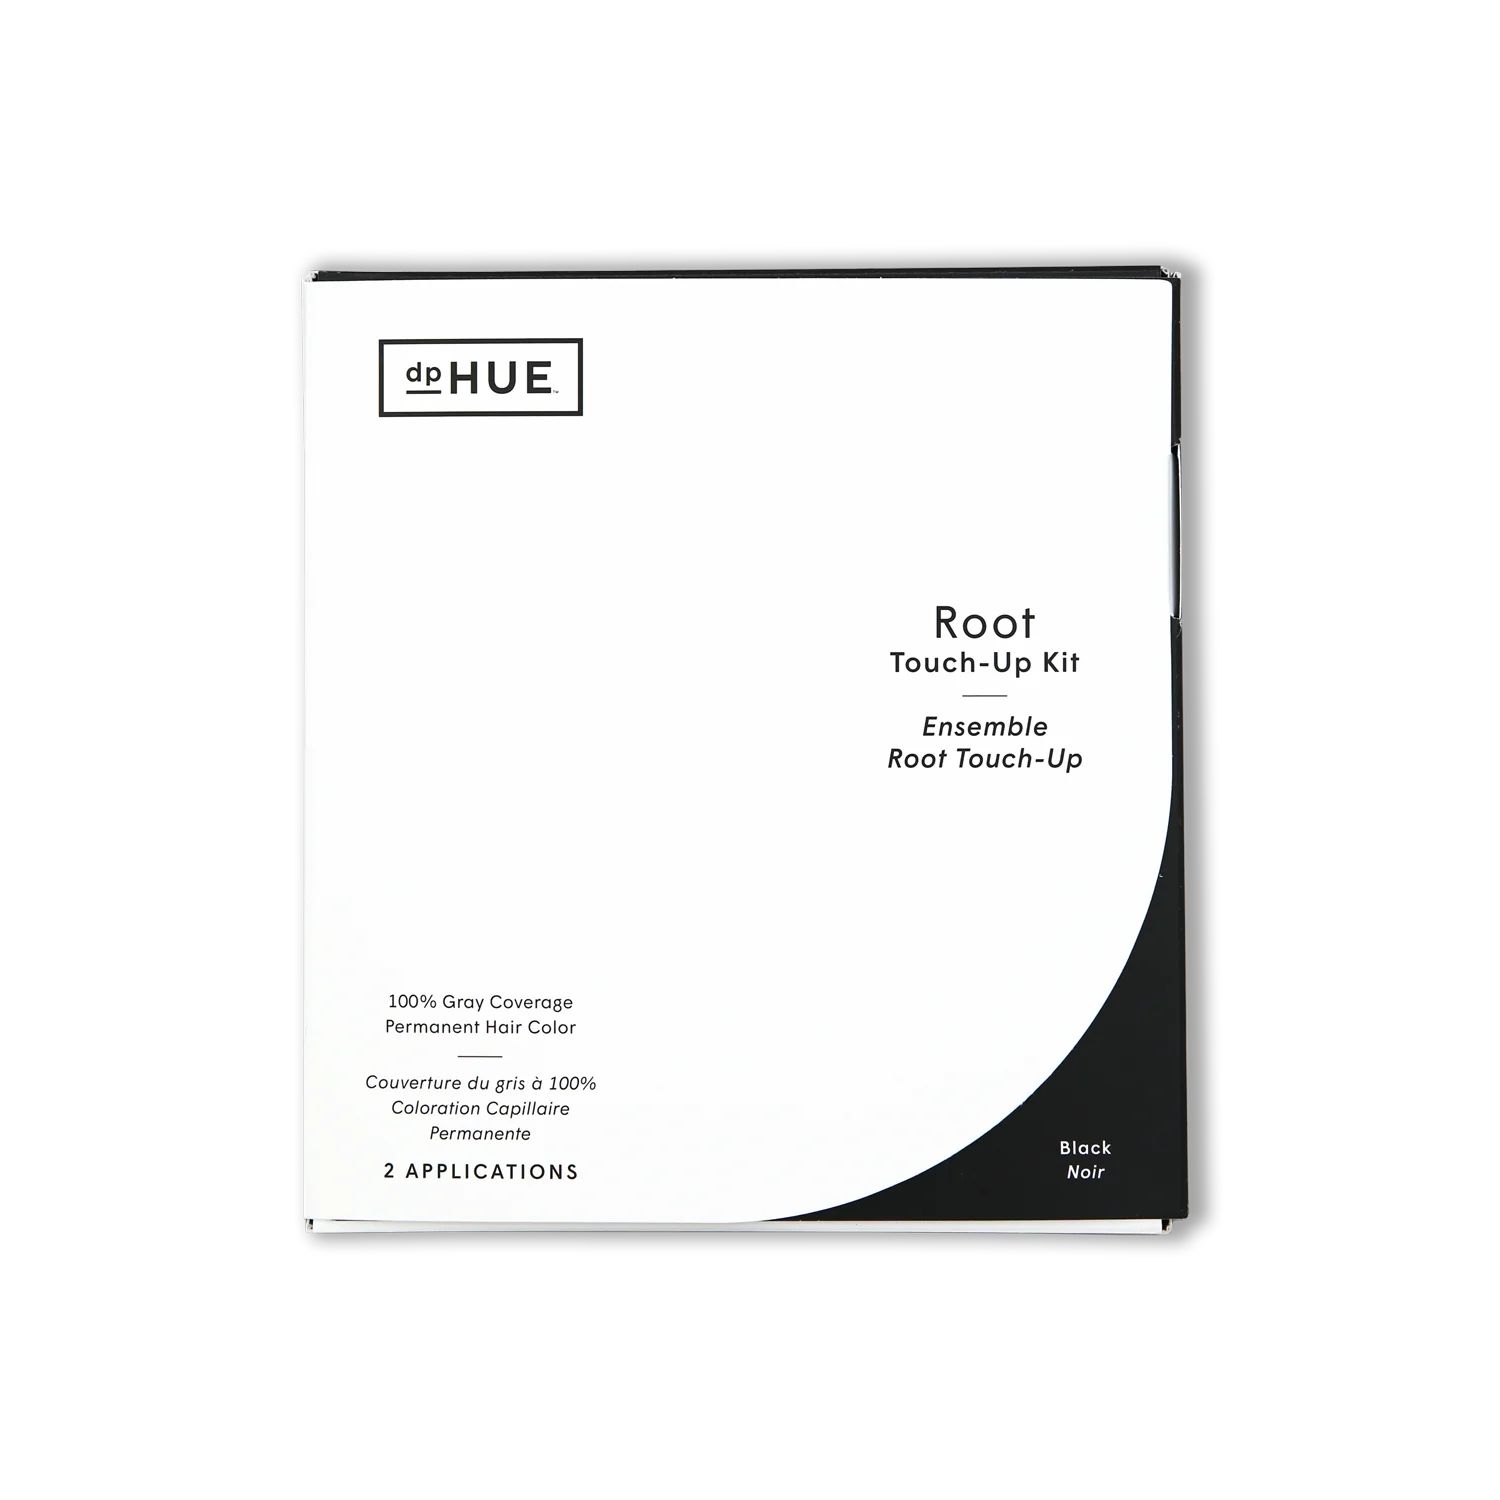 Root Touch-Up Kit | dpHUE